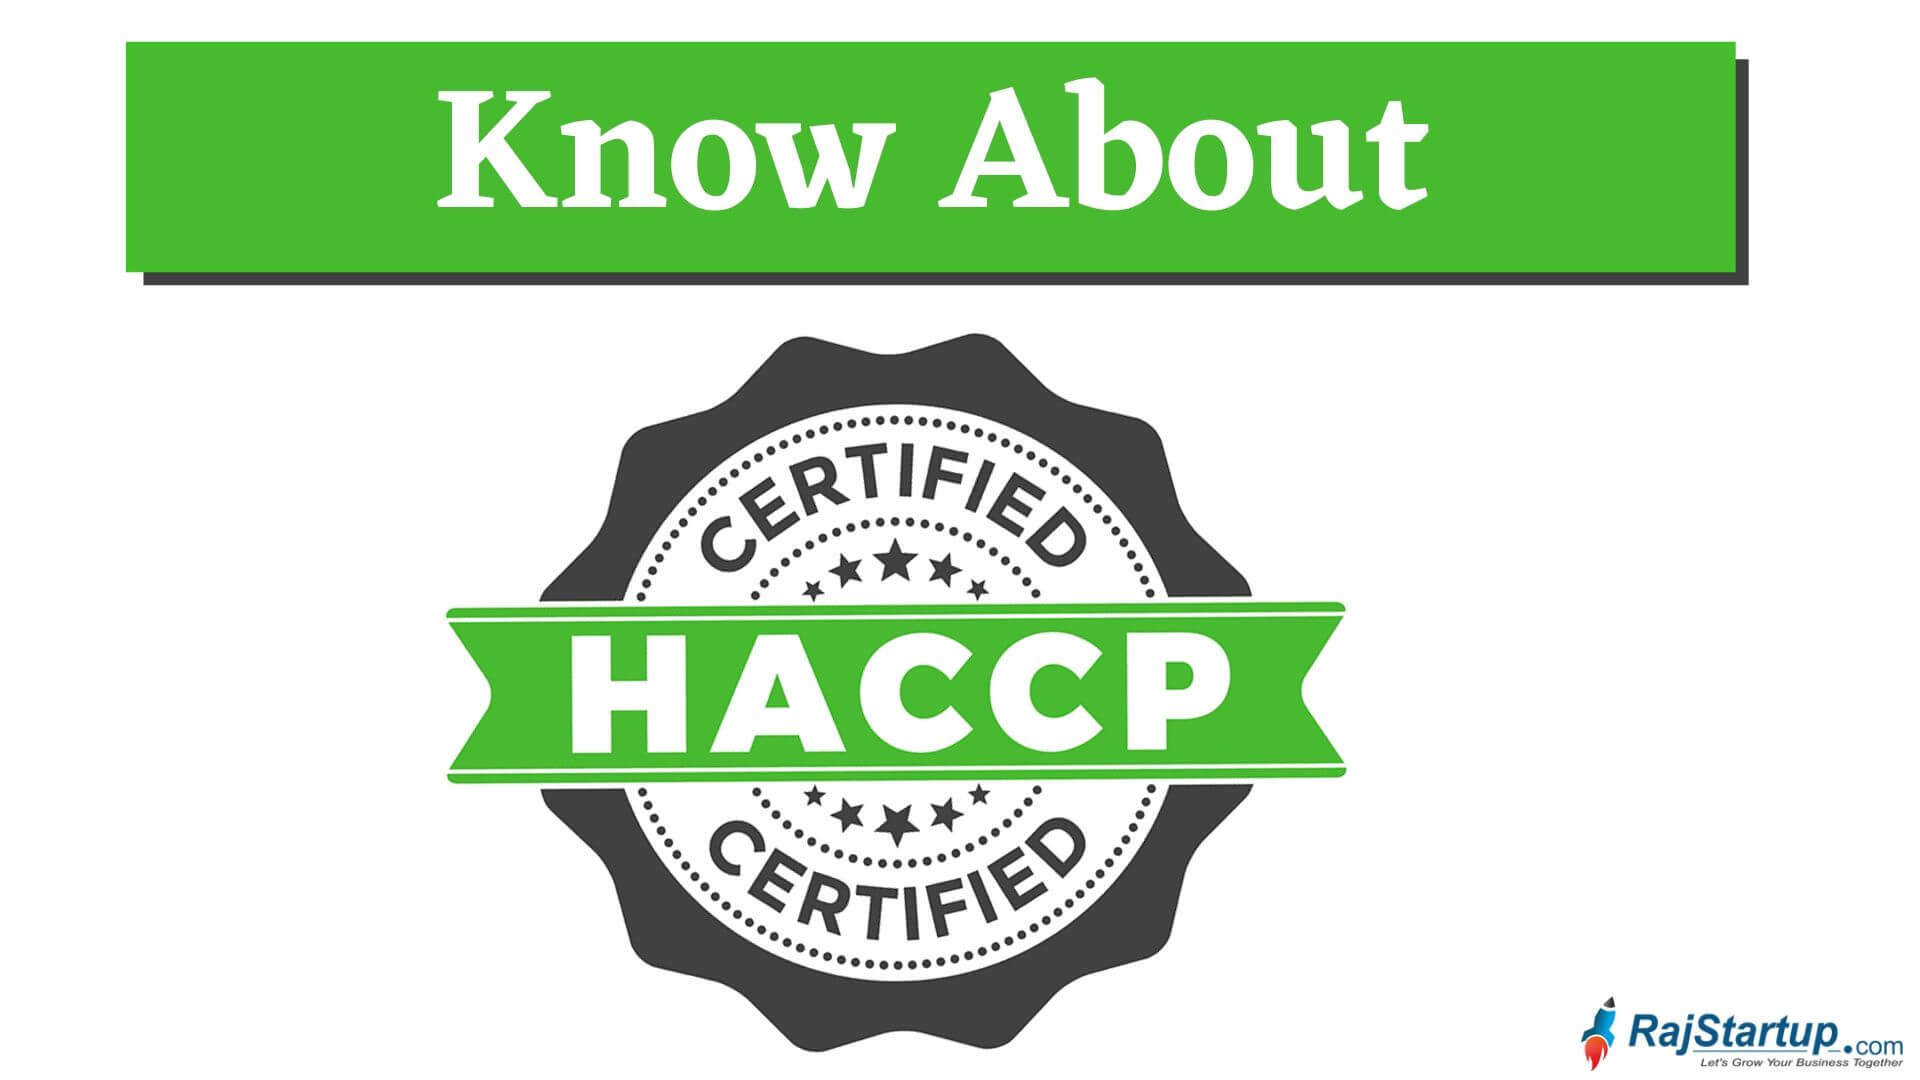 Haccp Certification Consultancy Service at best price in Navi Mumbai | ID:  20111950573